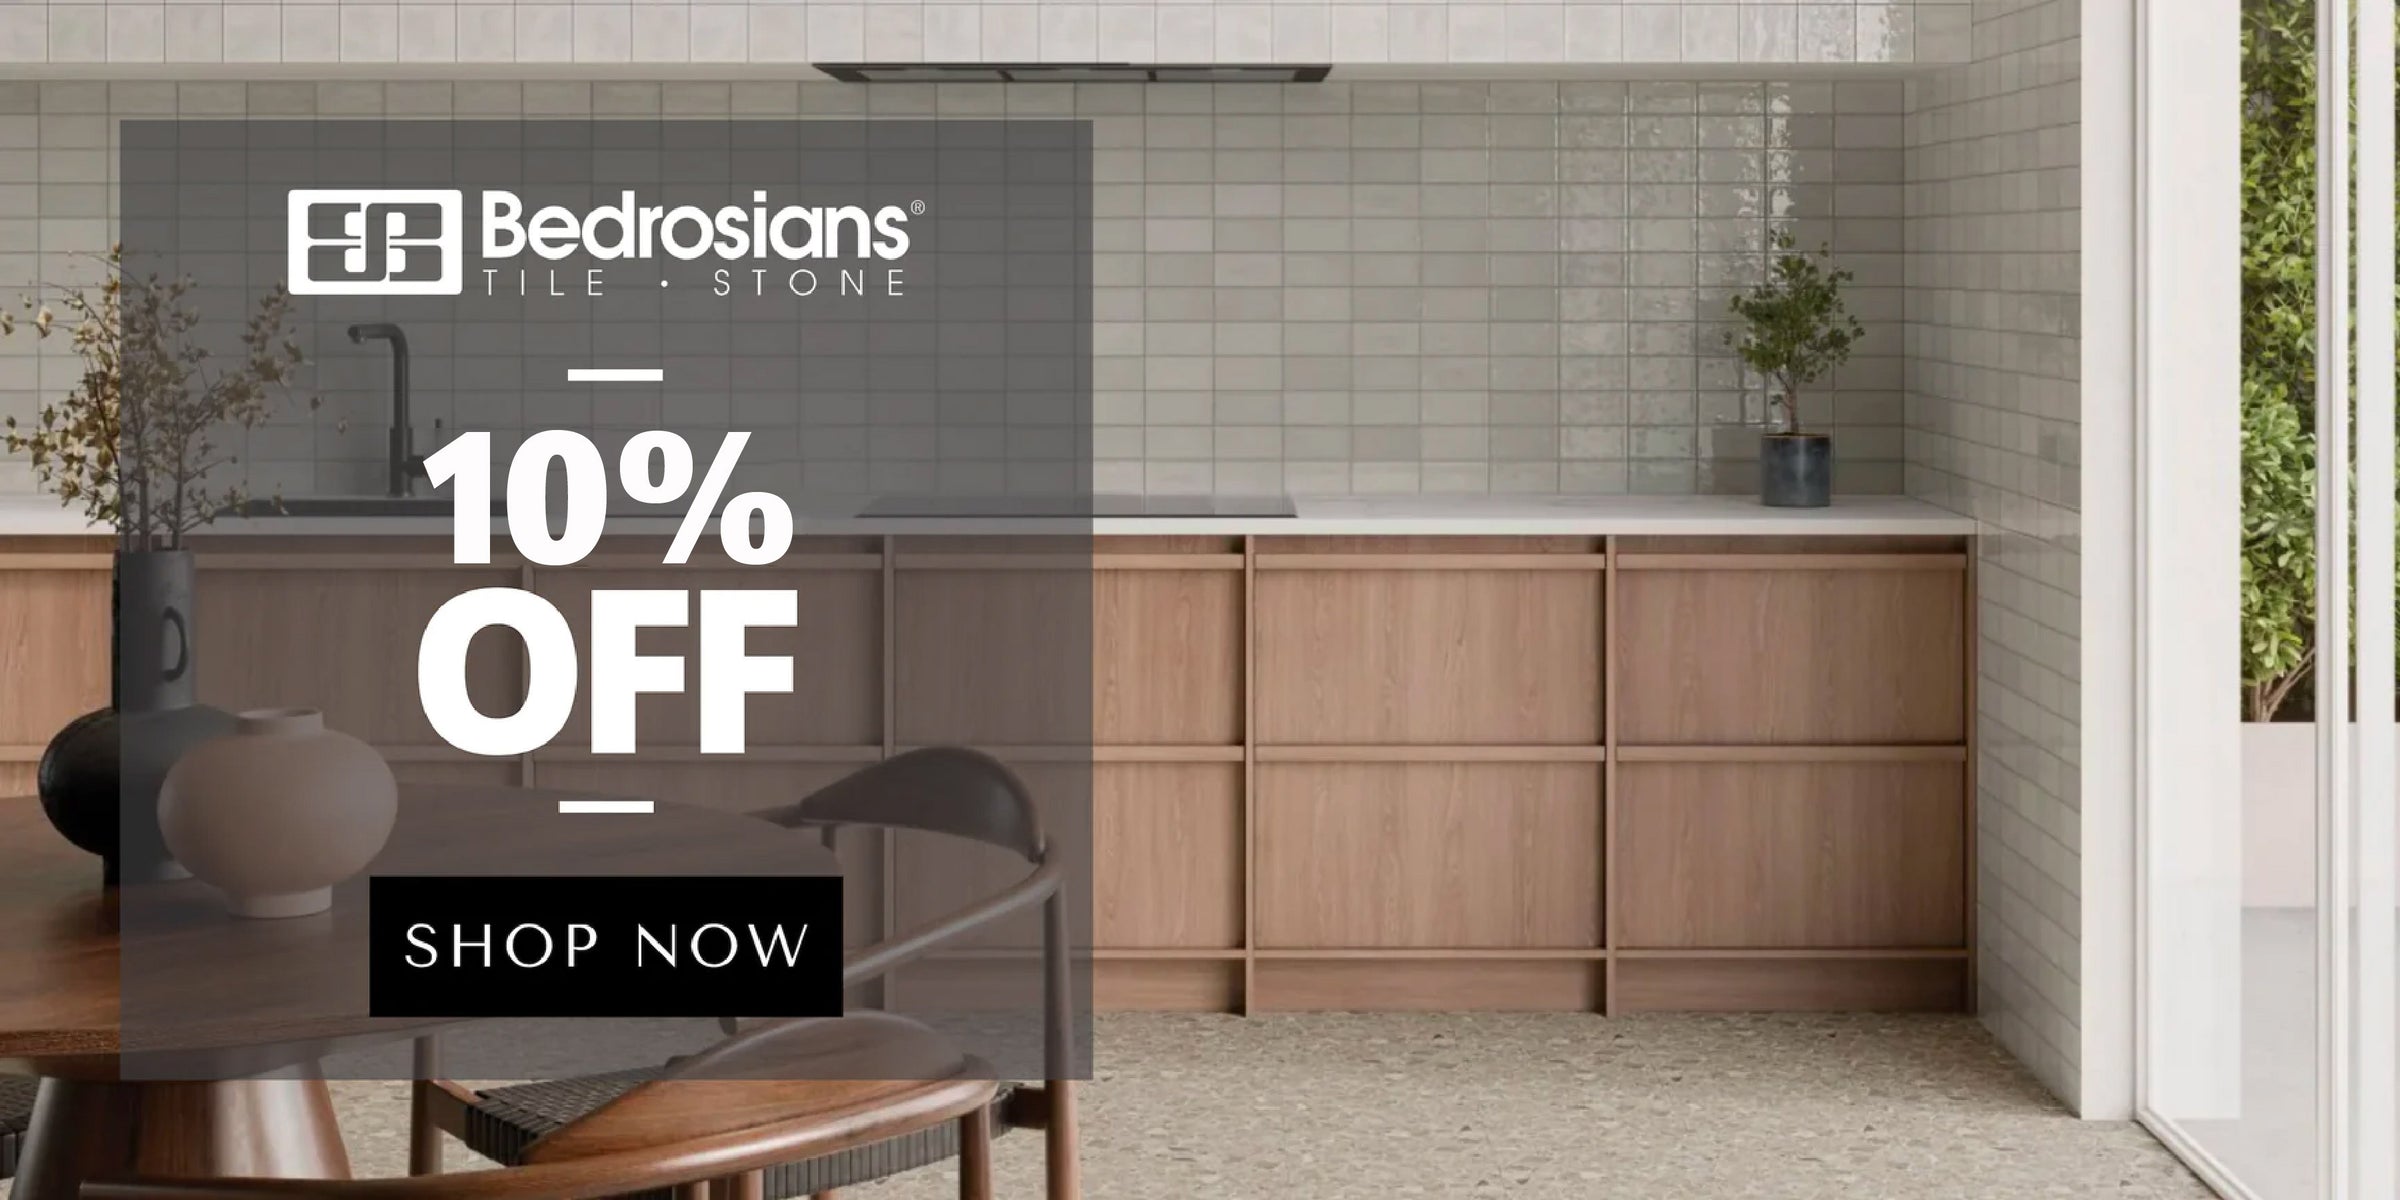 Bedrosians tiles available at a discount.